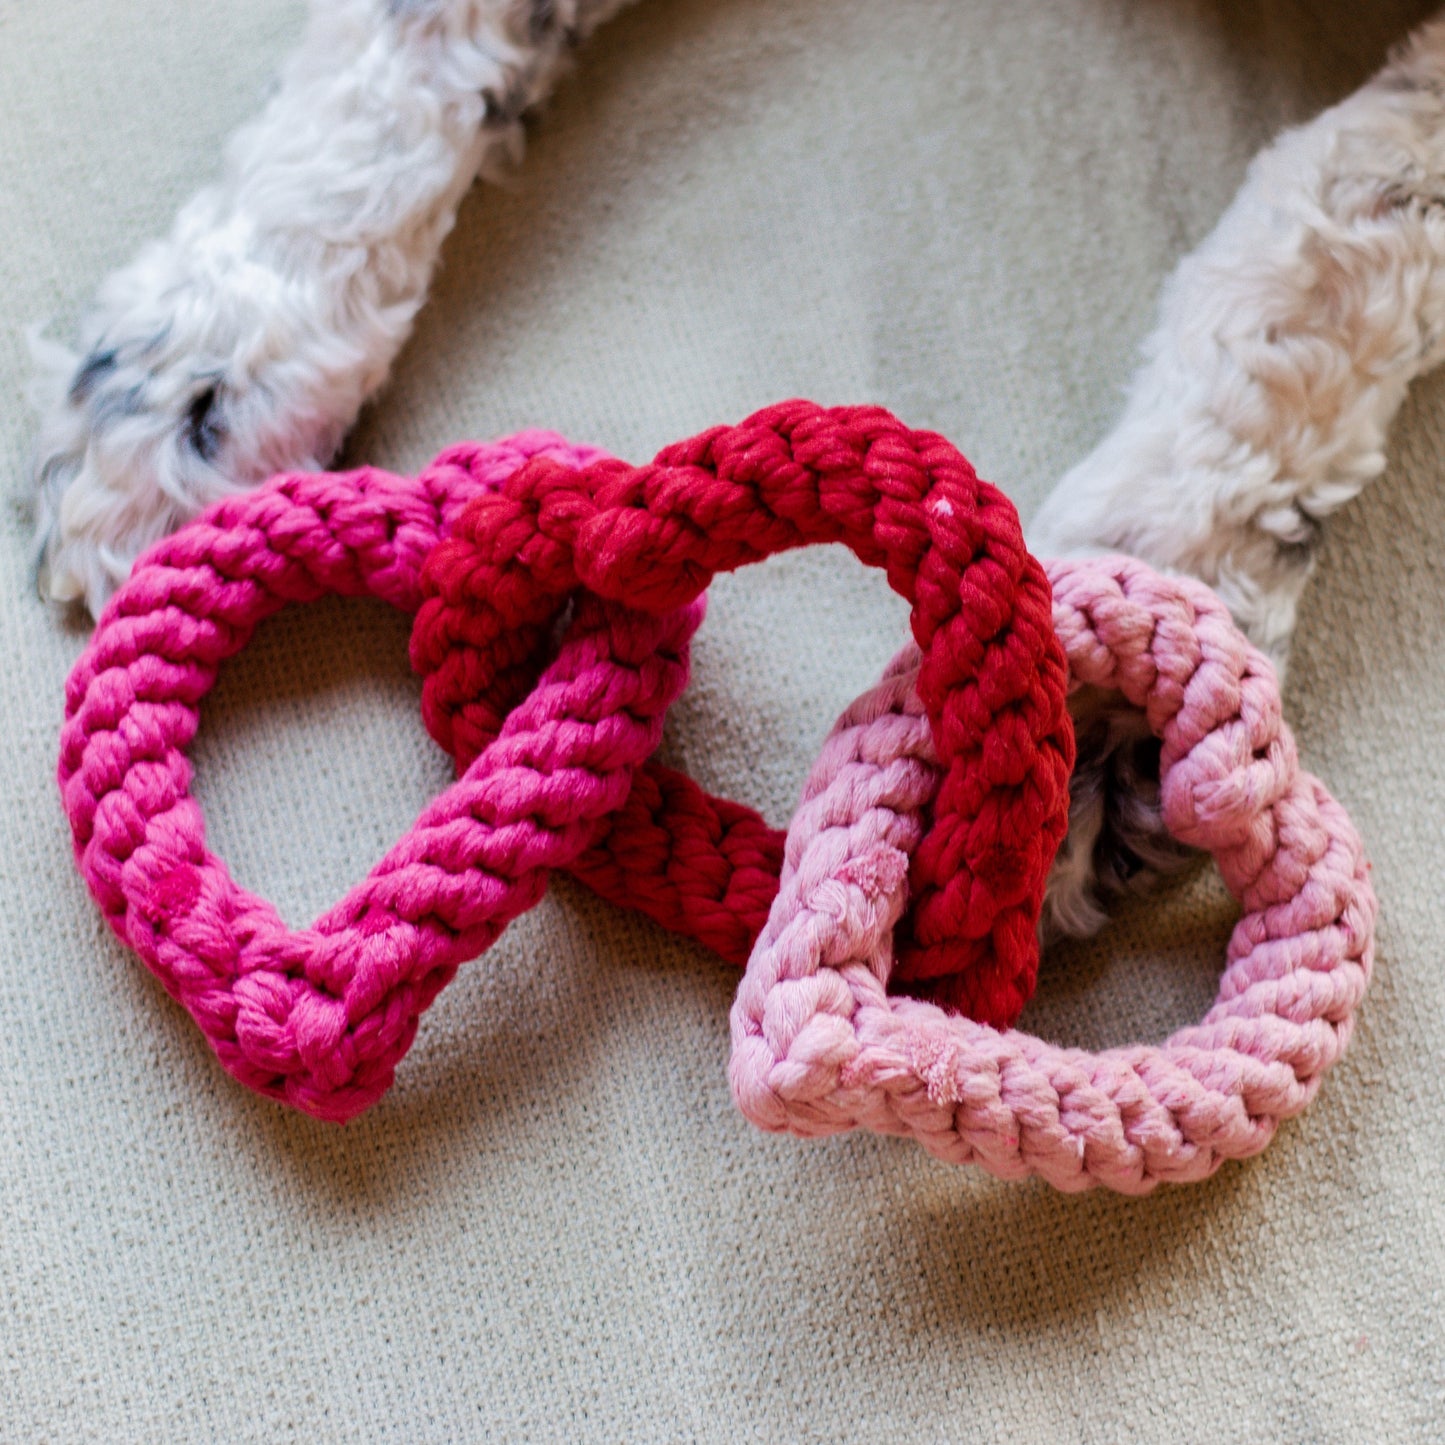 Midlee Interlocking Heart Rope Valentine Dog Toy - 6"- Pink Red Small Tug Toy